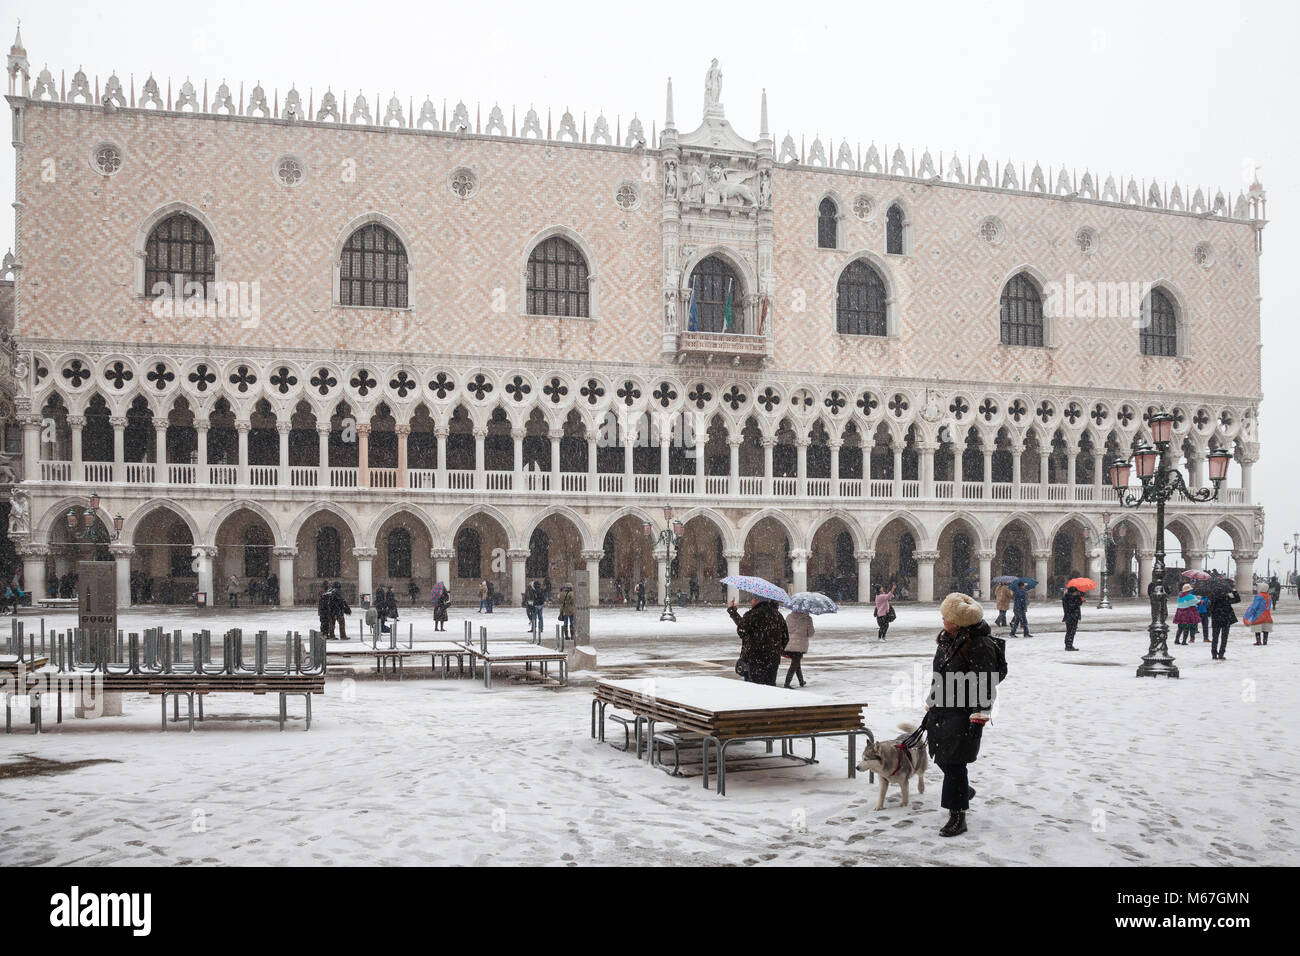 Venice, Veneto, Italy 1st March 2018. Bad weather in Venice today with sub-zero temperatures between minus 3 and minus 2 and continuous snow falling throughout the day caused by the Beast from the East, or the Siberian front from Russia sweeping across Europe. Woman walking her dog past the Doges Palace, Palazzo Ducale in Piazza San Marco. Stock Photo